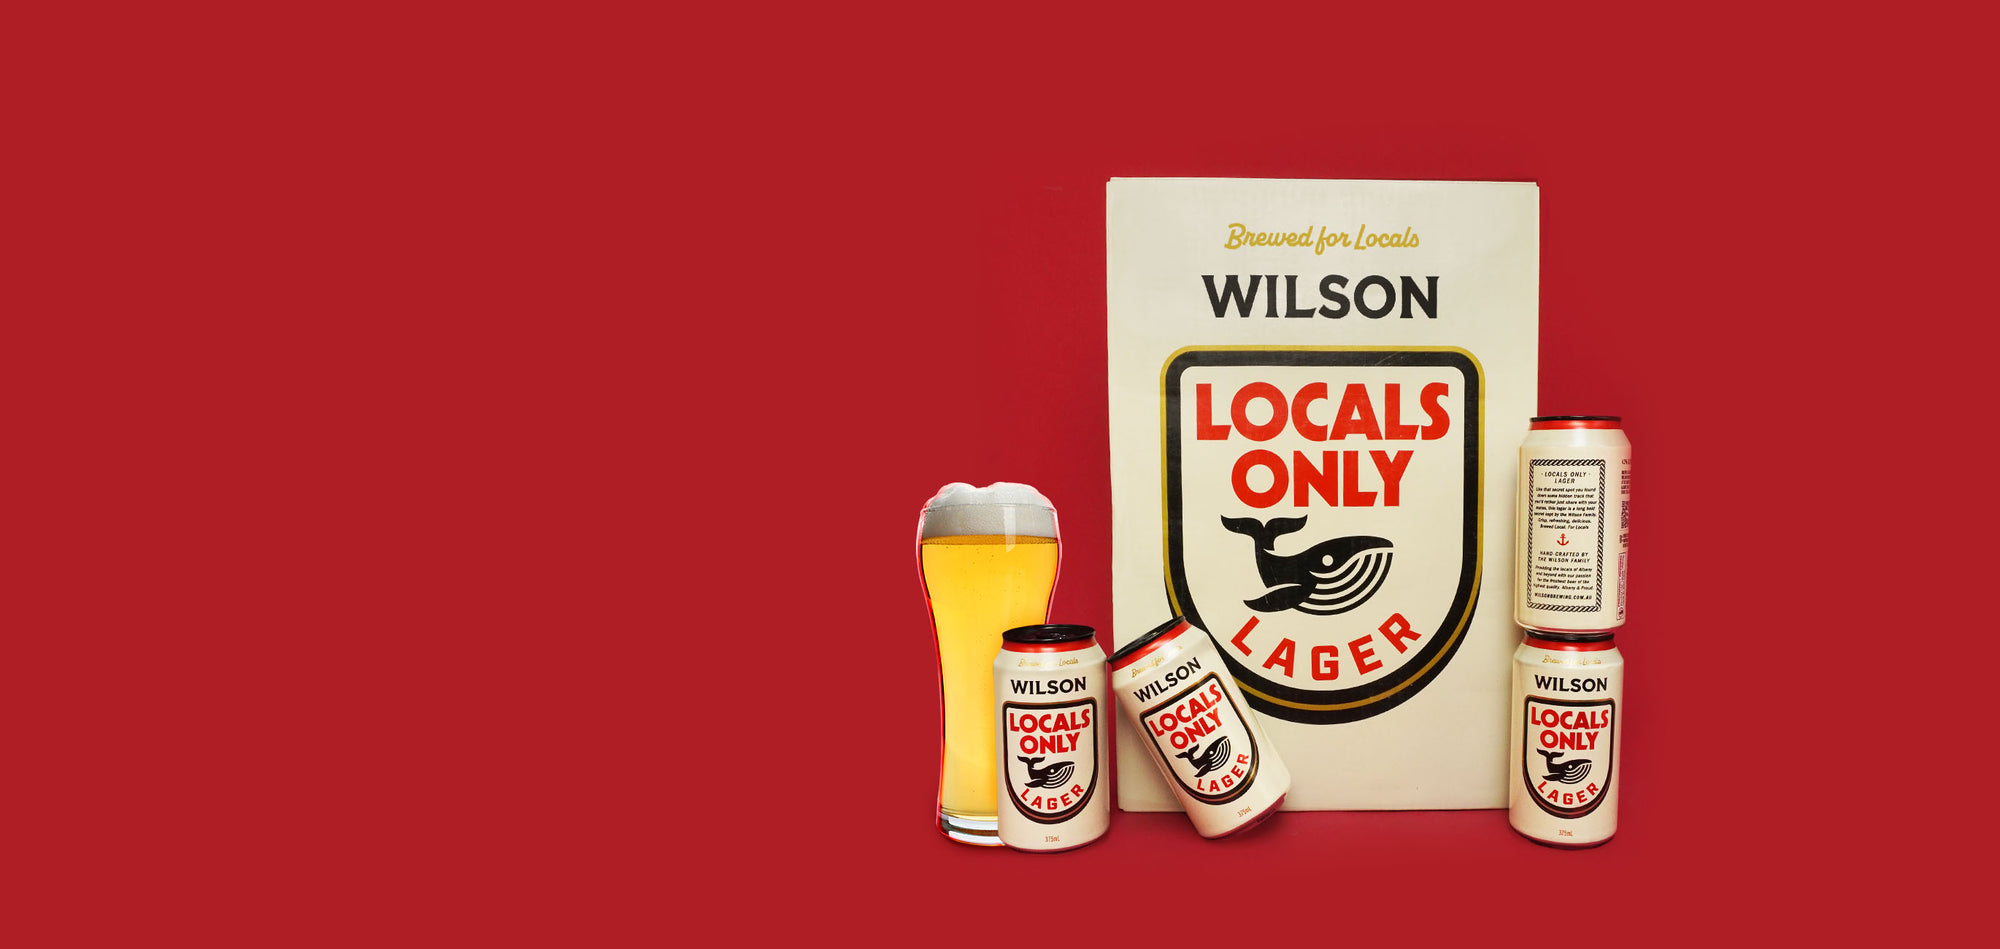 Wilson Locals Only Lager